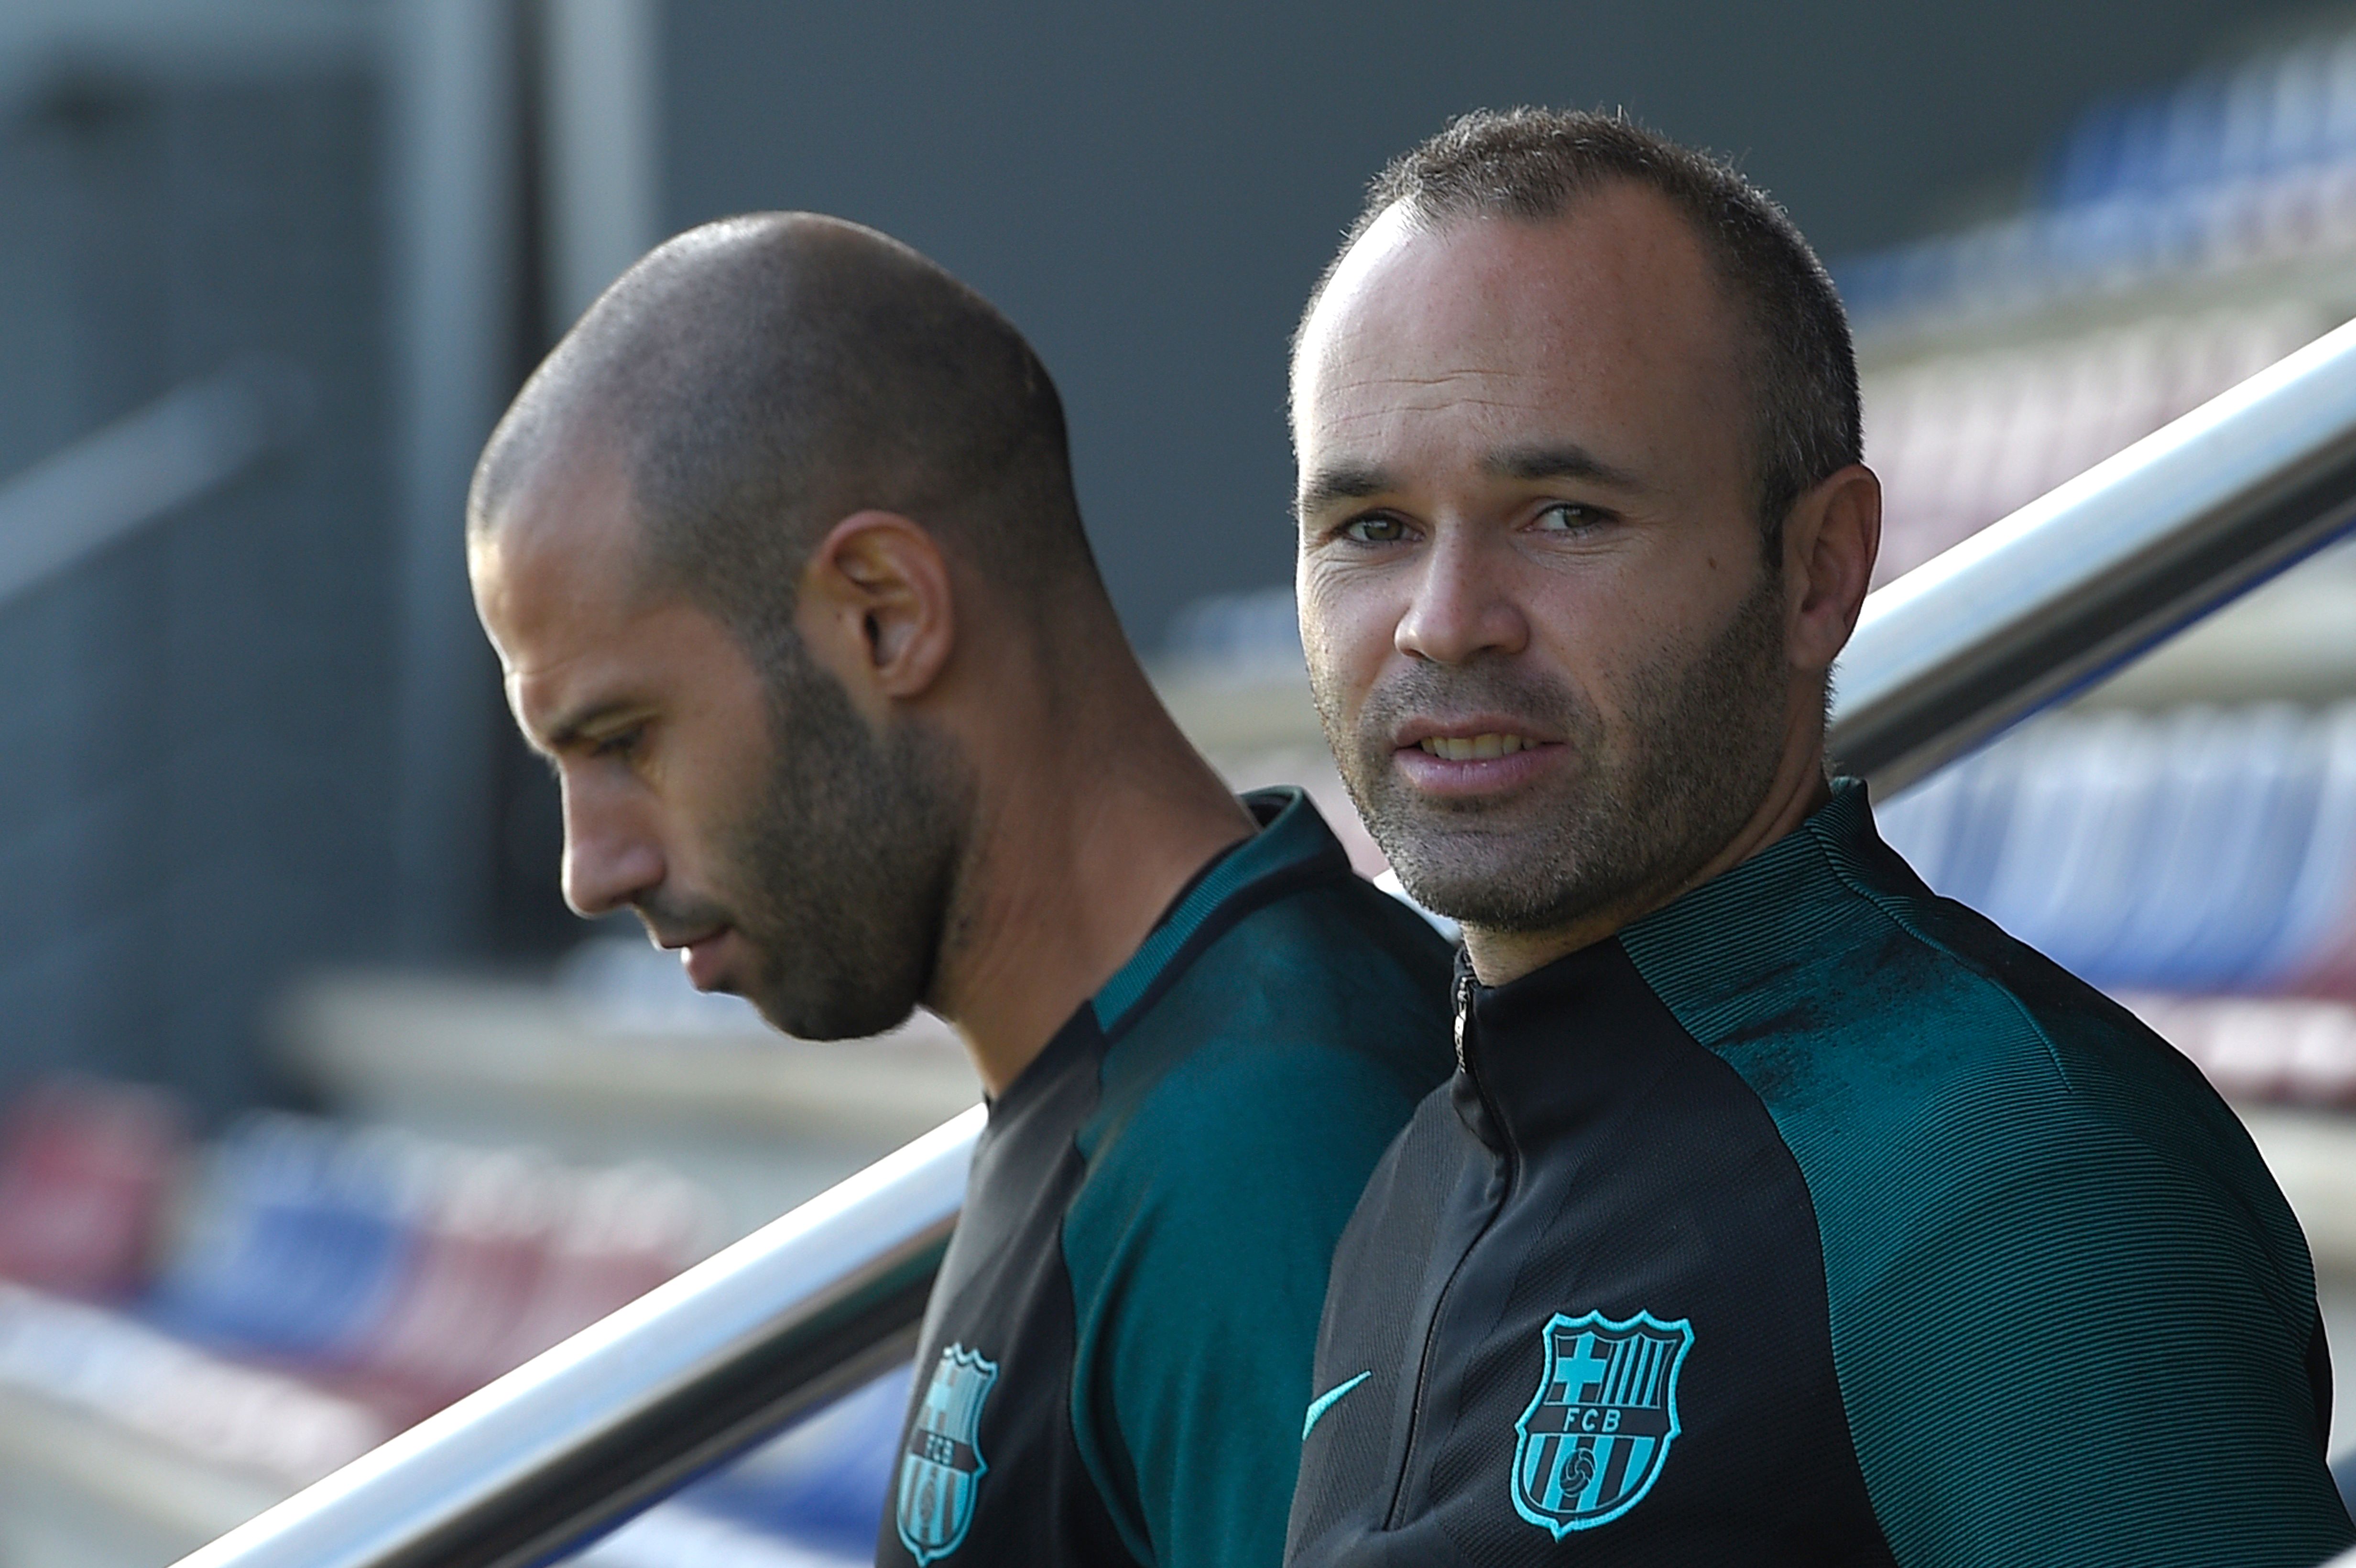 Barcelona's midfielder Andres Iniesta (R) and Barcelona's Argentinian defender Javier Mascherano arrive for a training session at the Sports Center FC Barcelona Joan Gamper in Sant Joan Despi, near Barcelona on October 18, 2016, on the eve of the UEFA Champions League football match FC Barcelona vs Manchester City. / AFP / LLUIS GENE        (Photo credit should read LLUIS GENE/AFP/Getty Images)